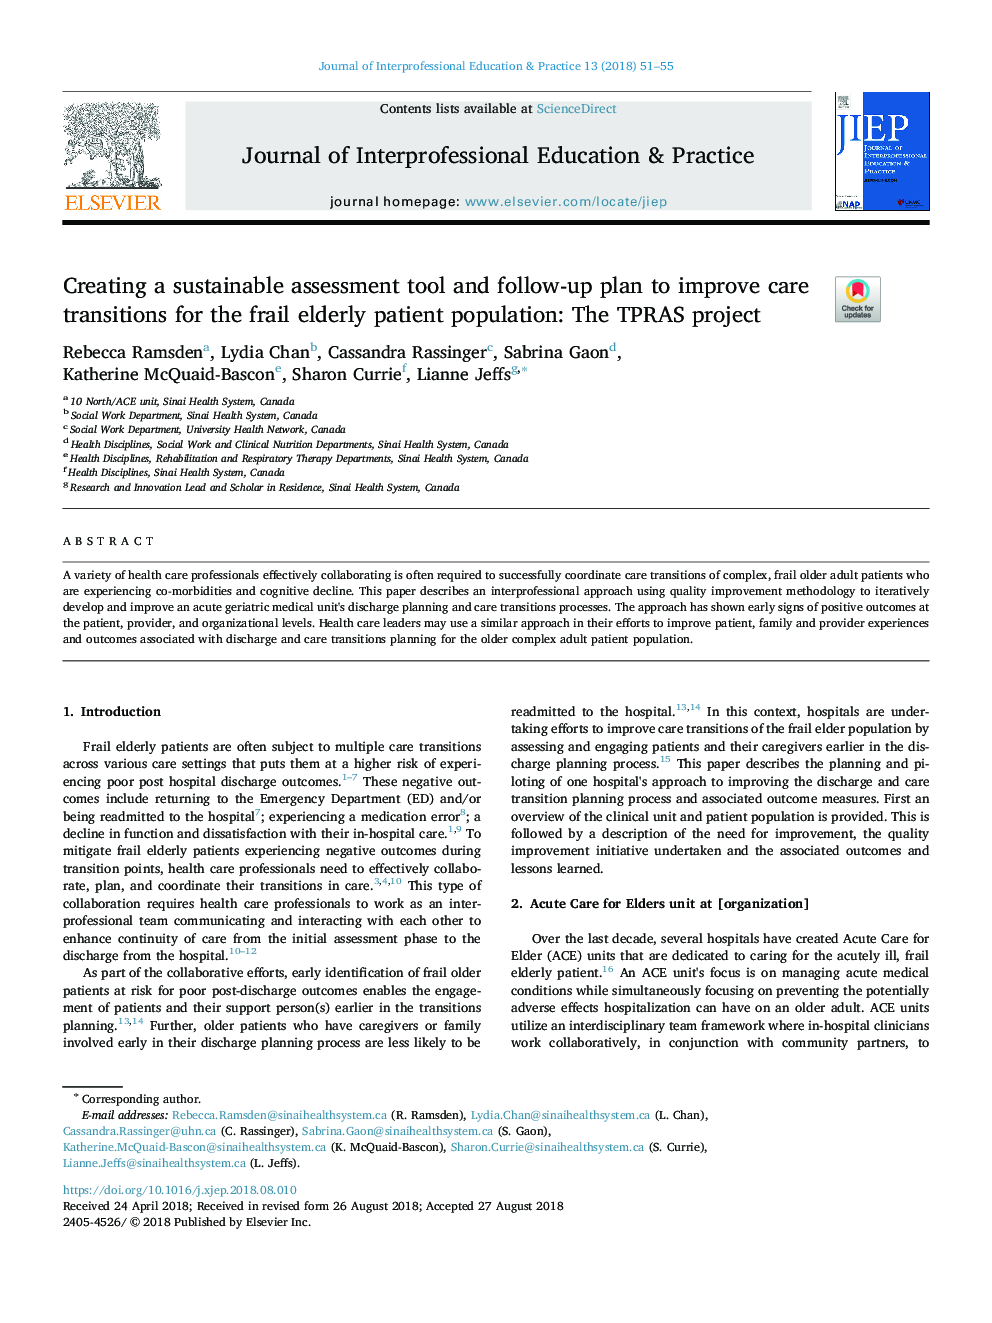 Creating a sustainable assessment tool and follow-up plan to improve care transitions for the frail elderly patient population: The TPRAS project